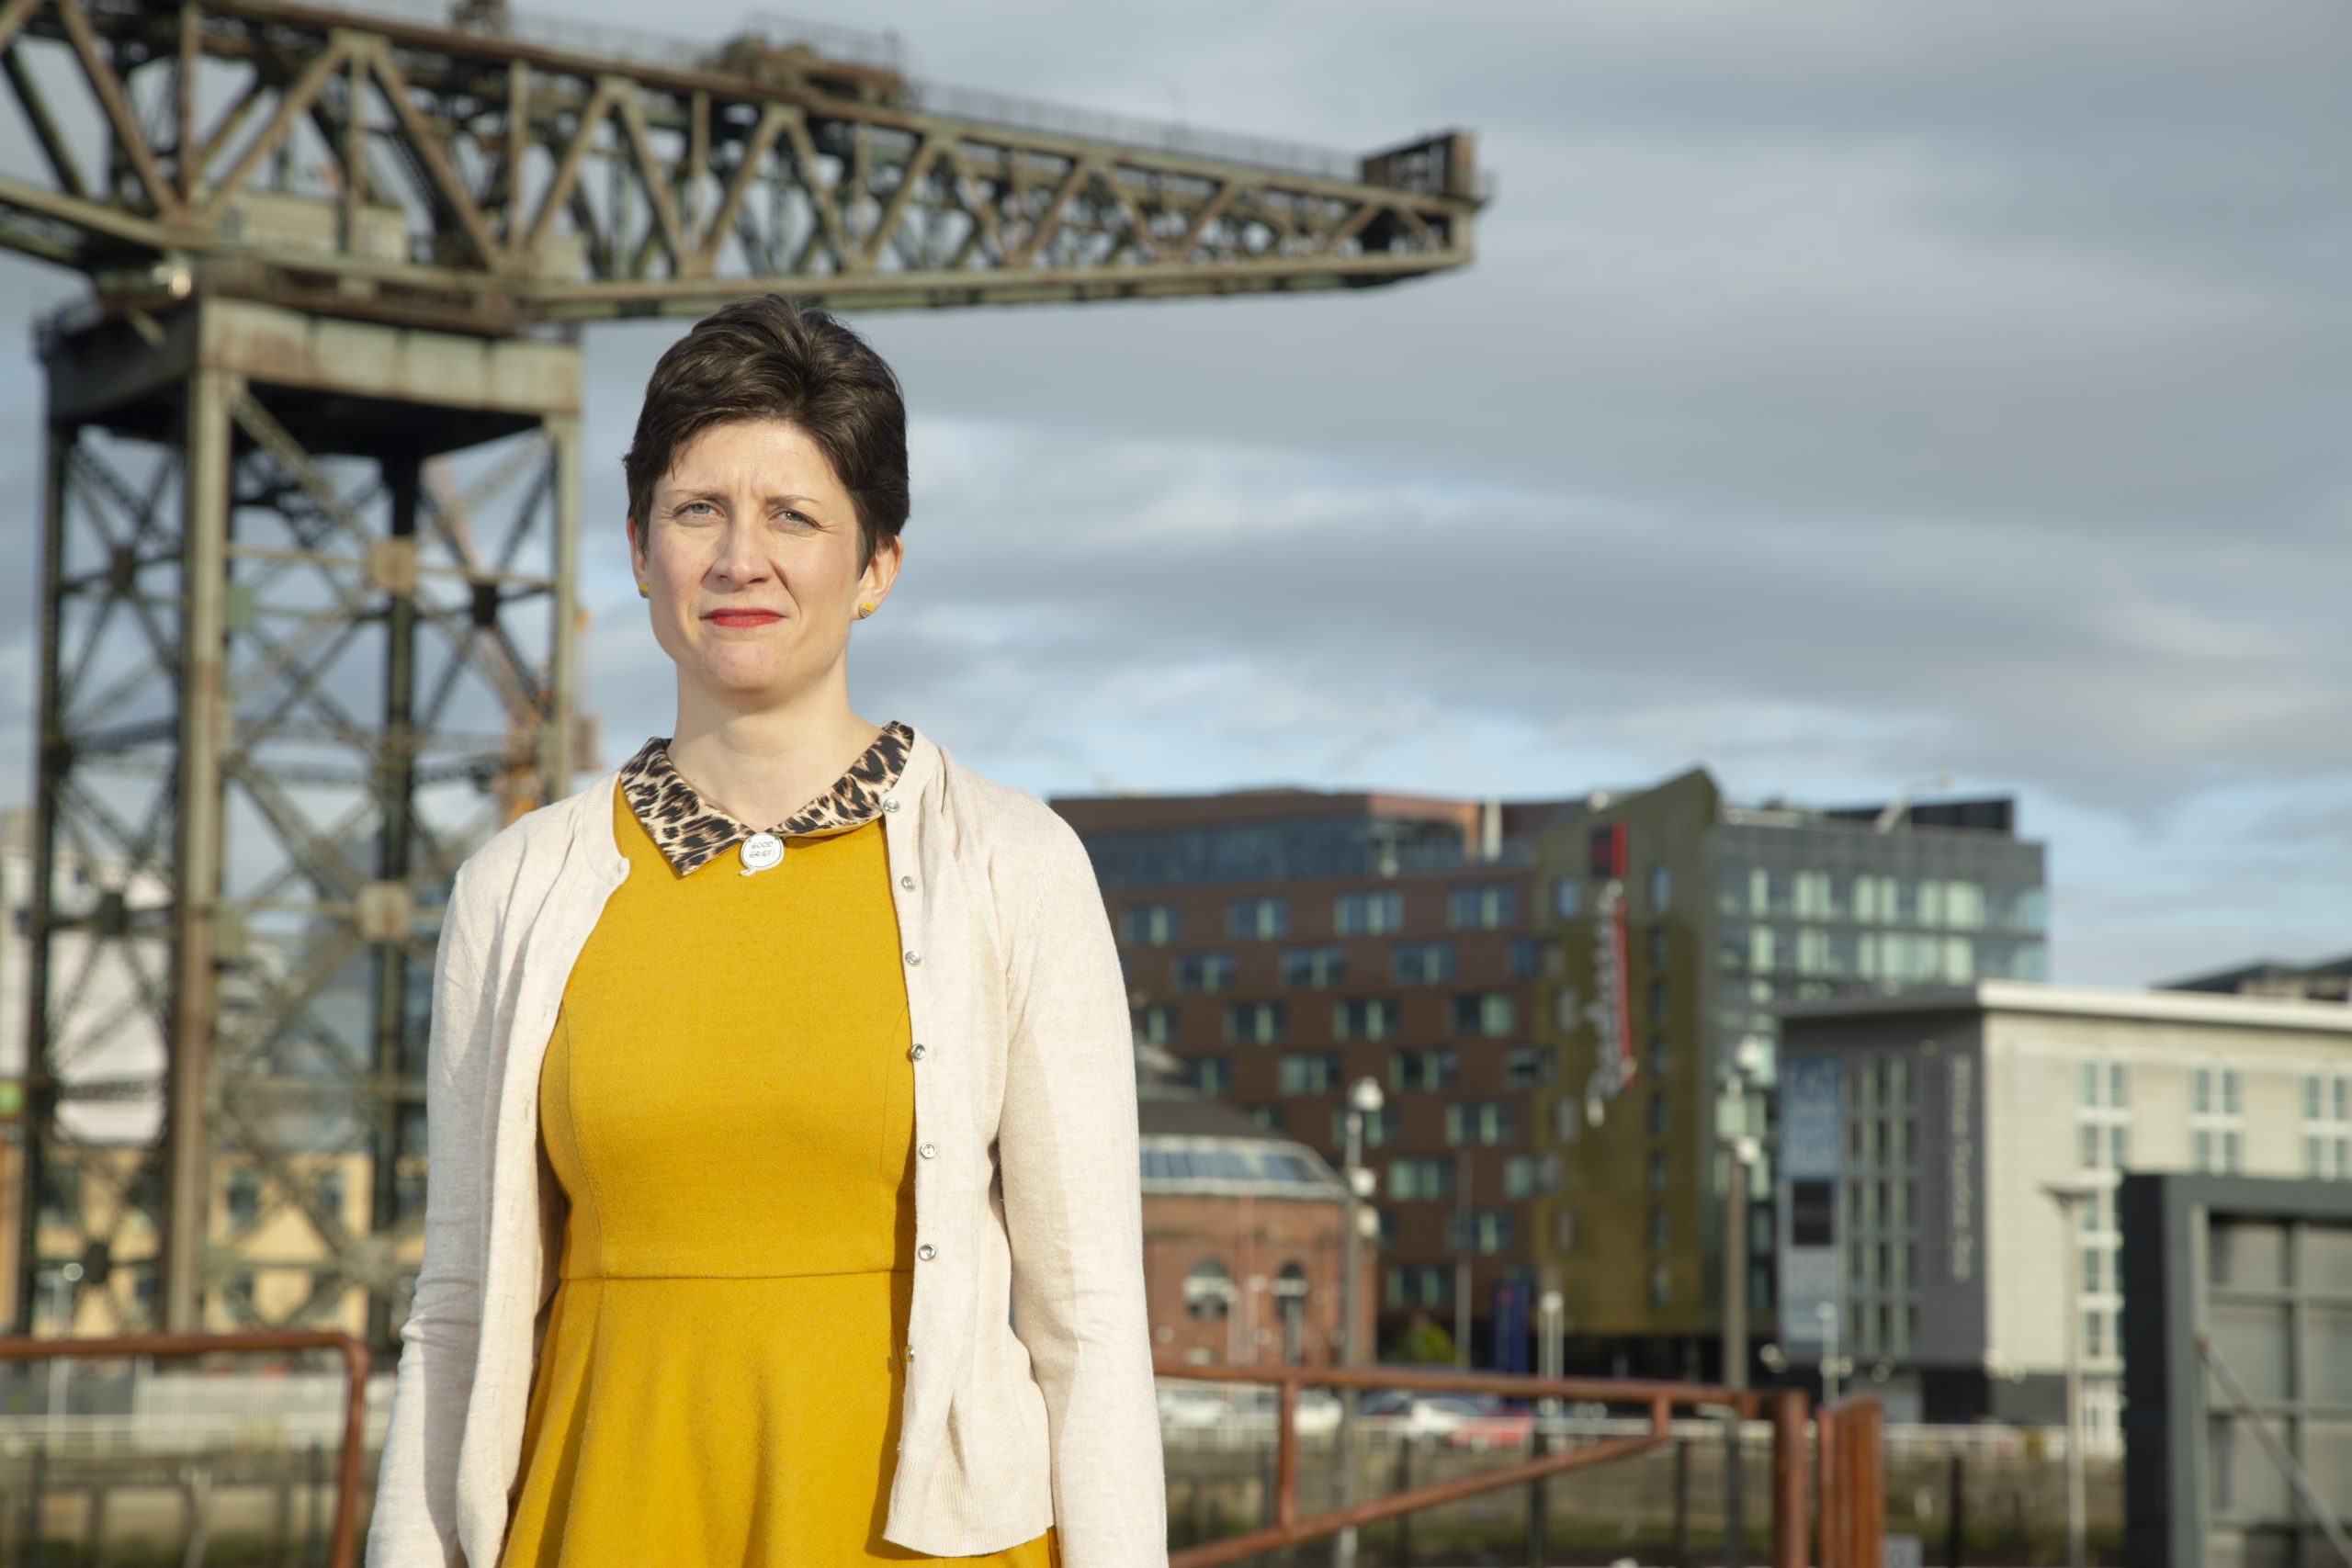 Statement on Gaza from Alison Thewliss MP